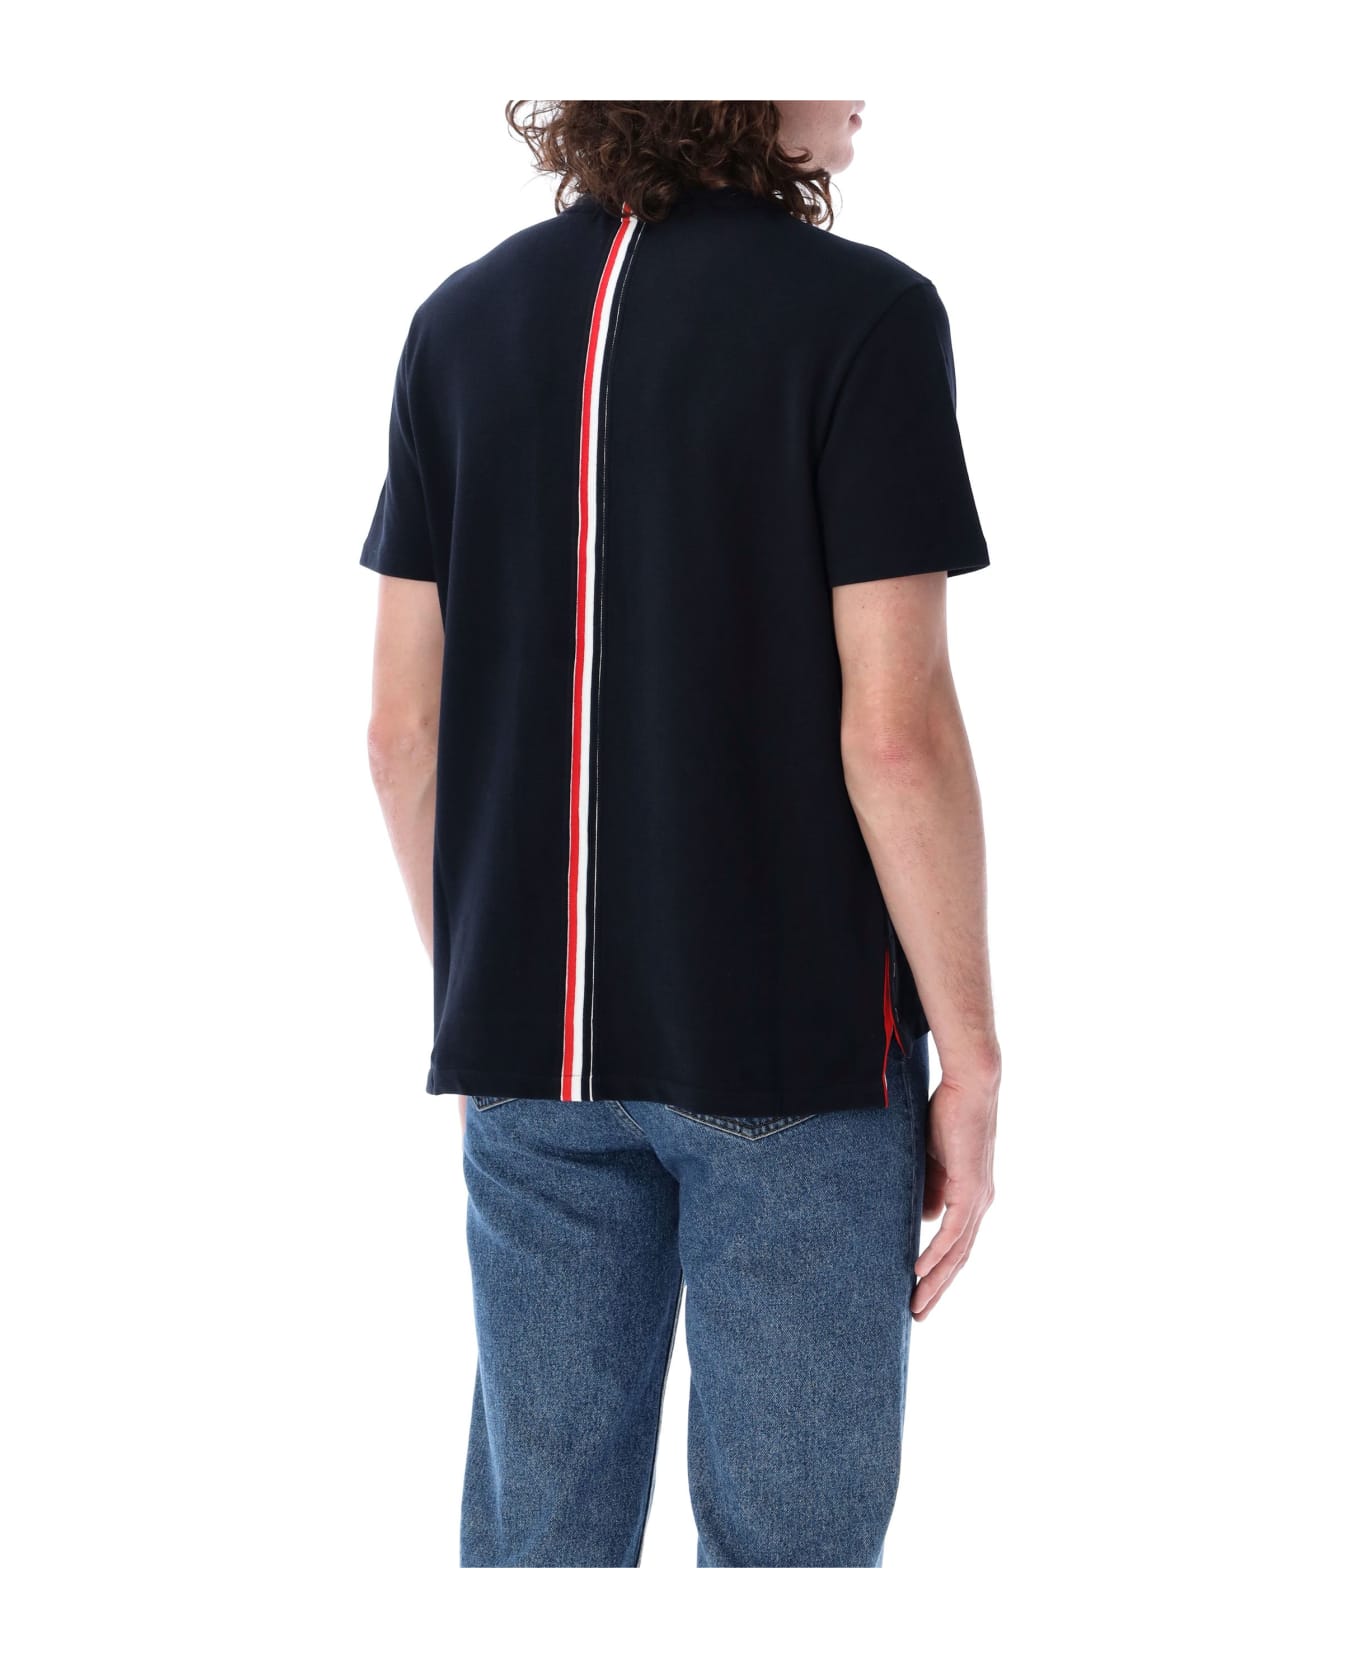 Thom Browne Relaxed Fit Ss Tee - NAVY